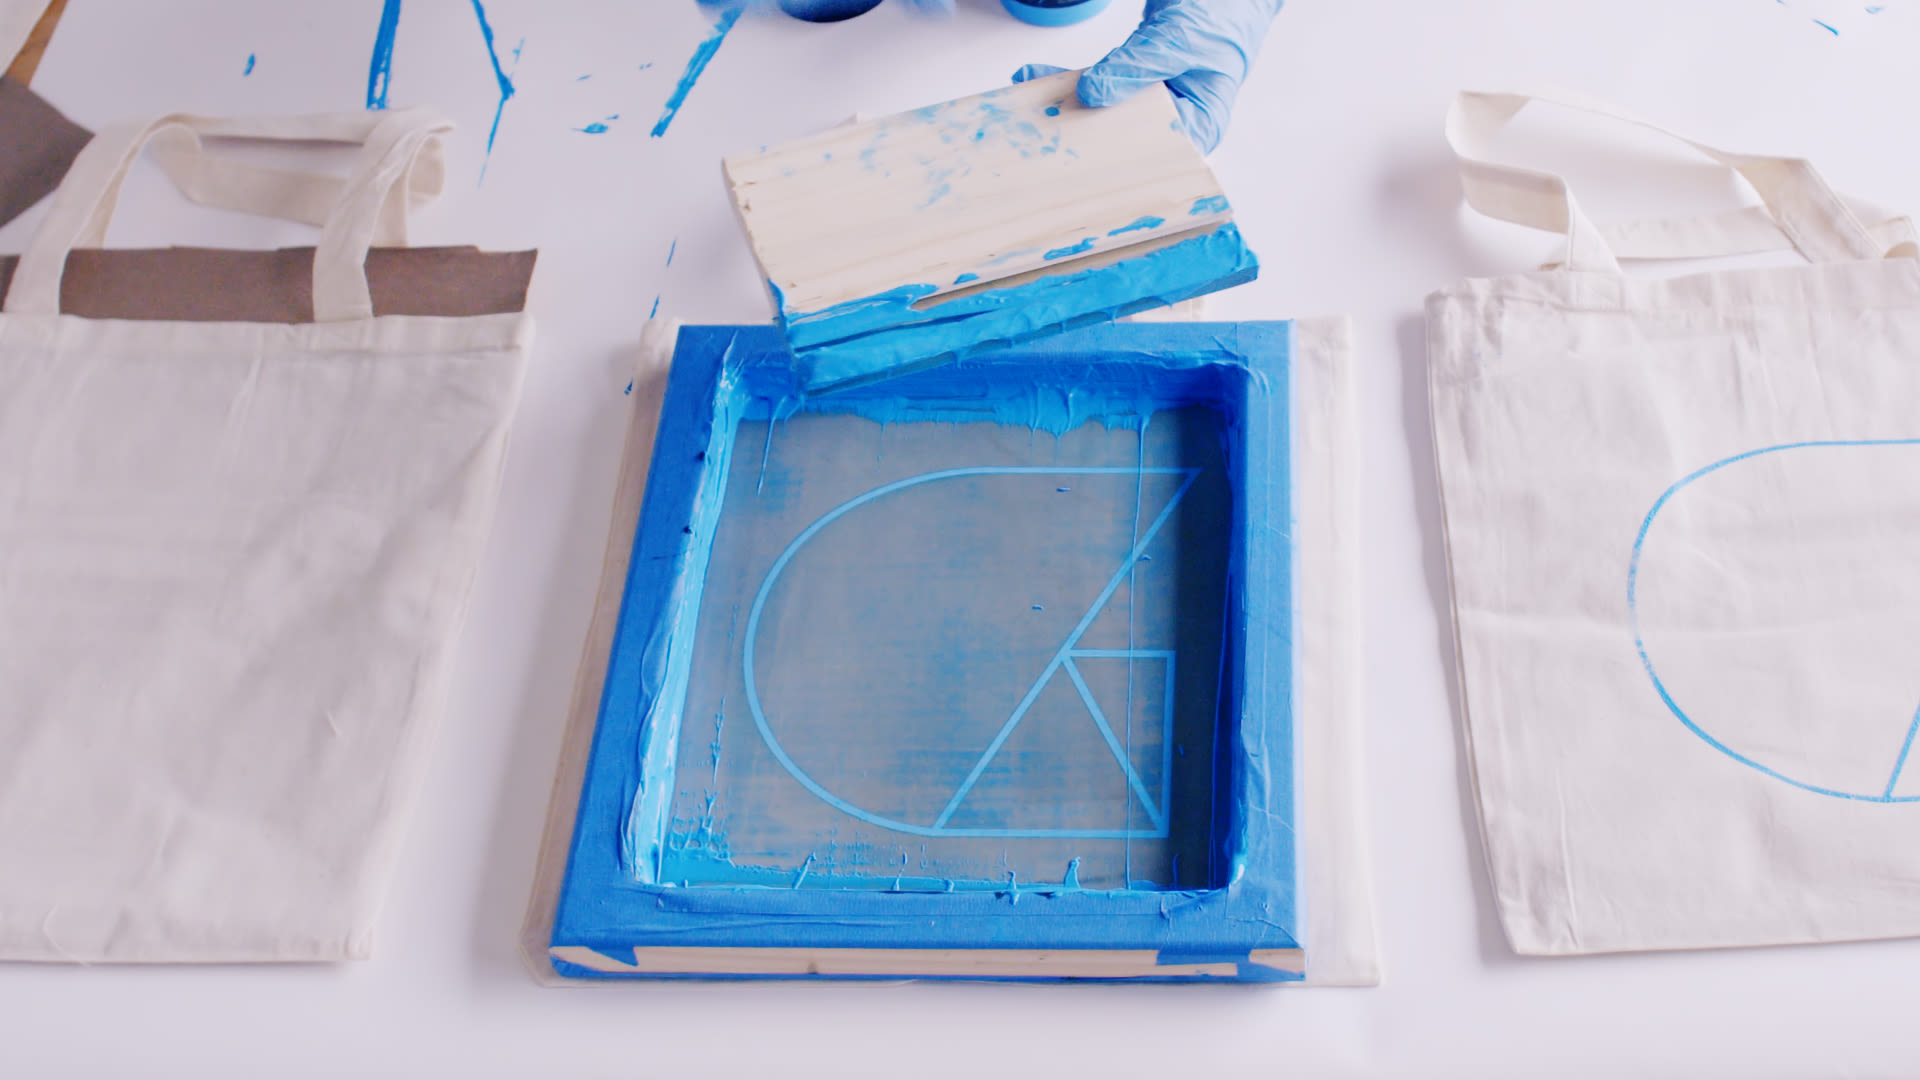 Watch DIY: How To Burn a Silkscreen and Print at Home